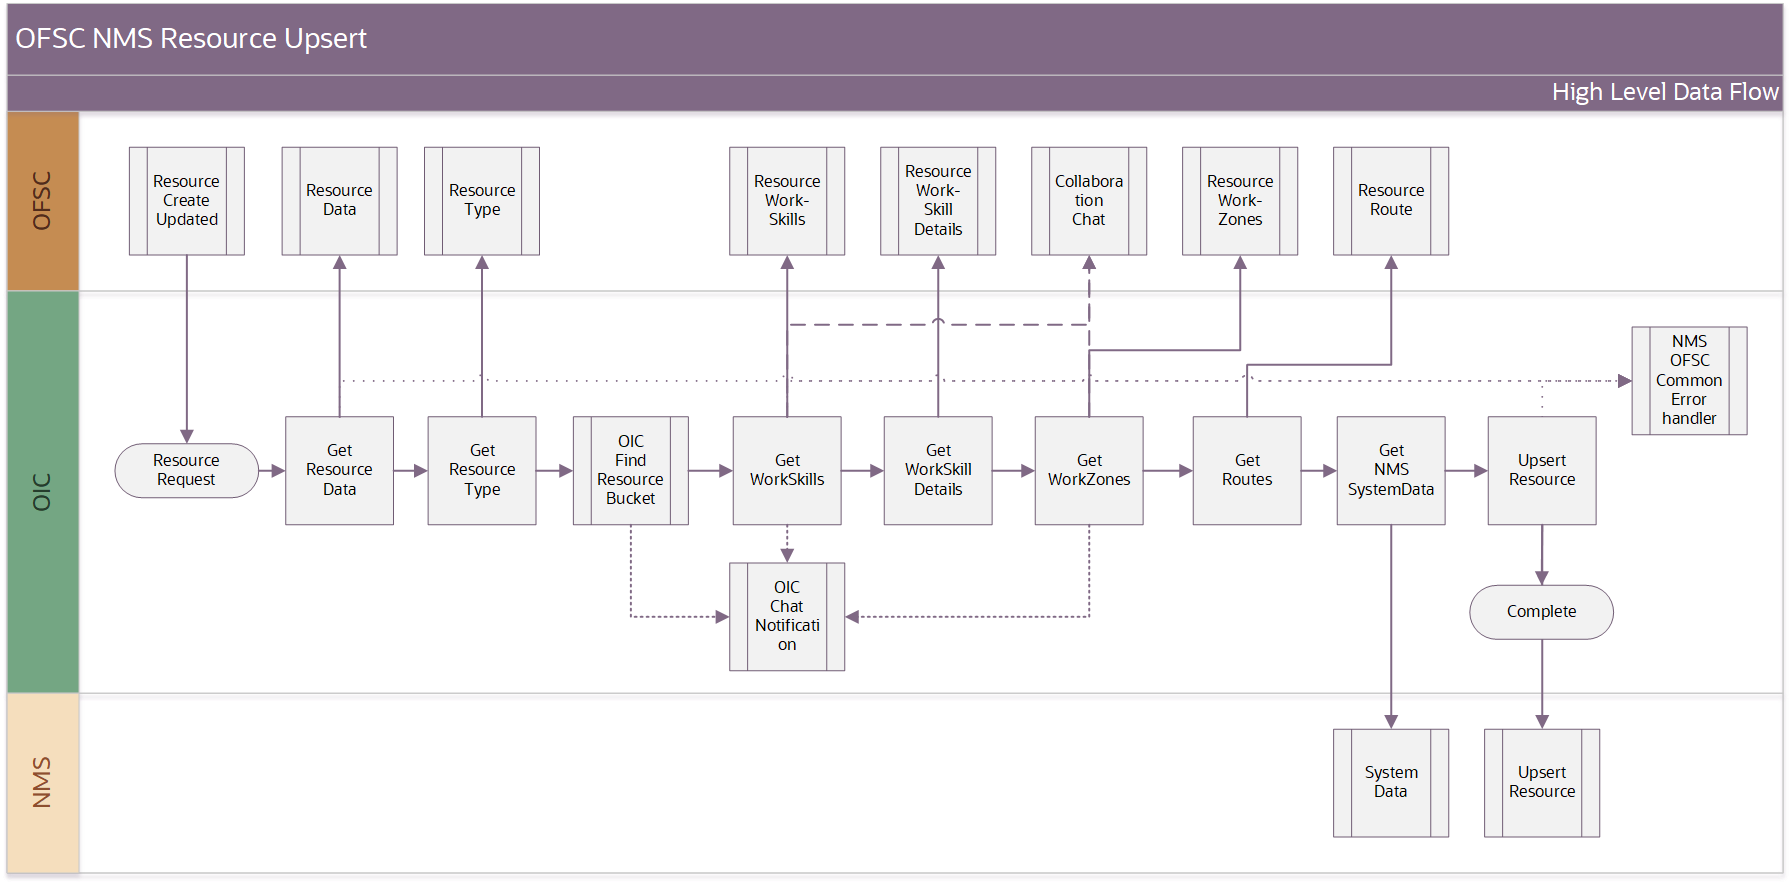 Shows a graphical representation of the Resource Create/Update integration process.